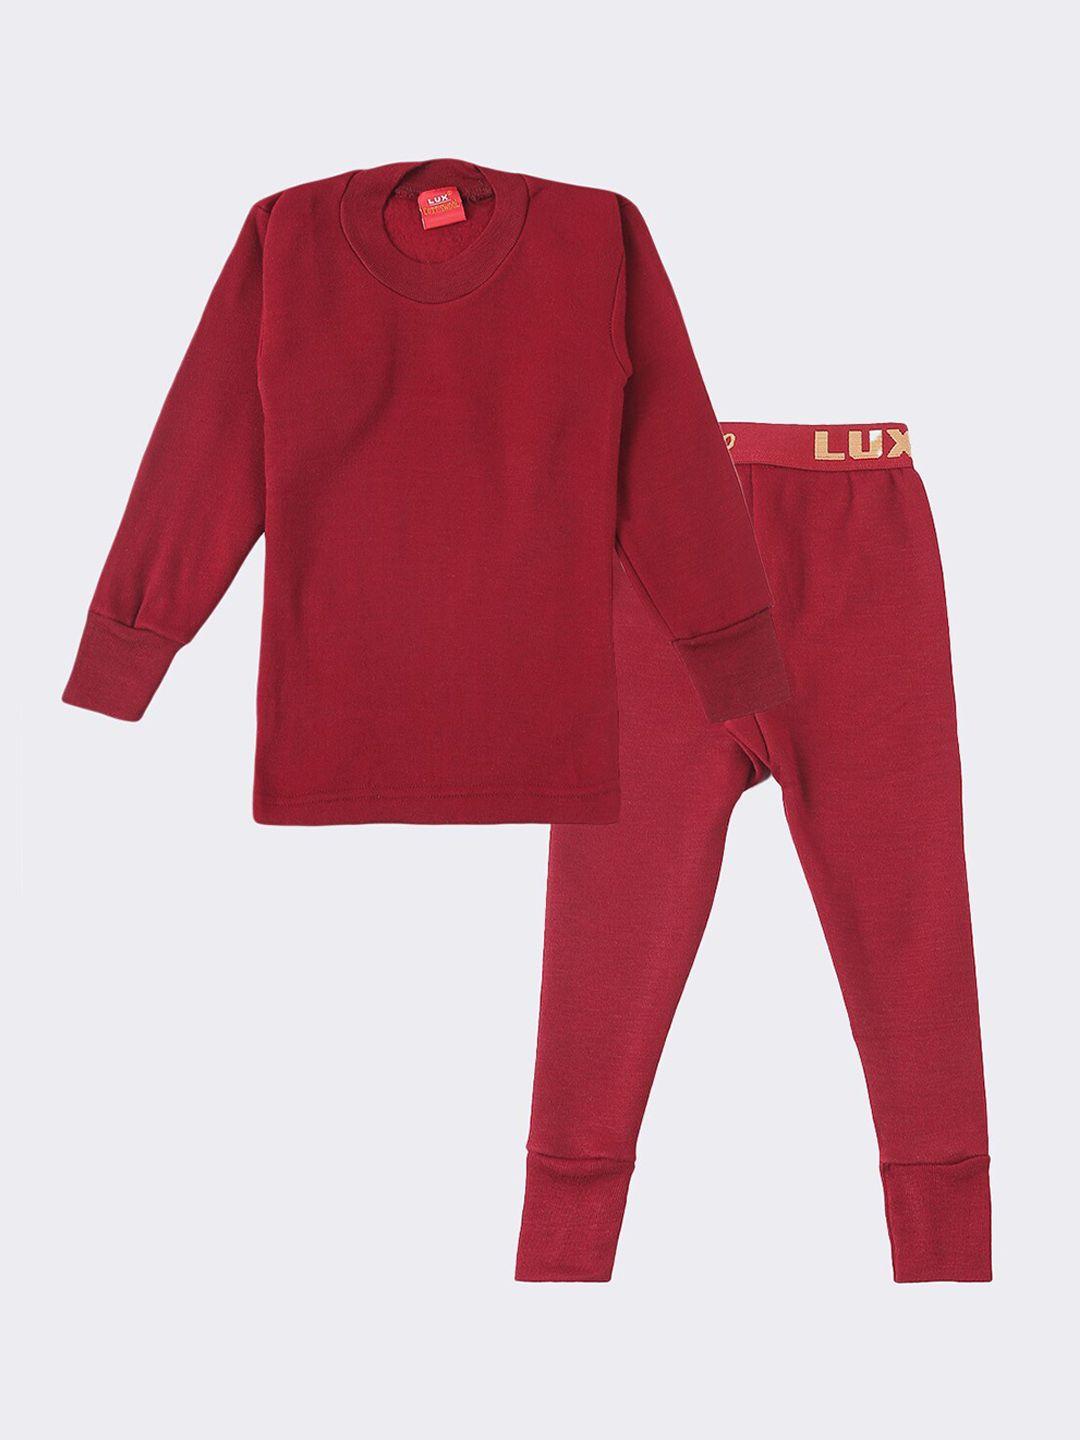 lux-cottswool-boys-maroon-solid-cotton-thermal-set